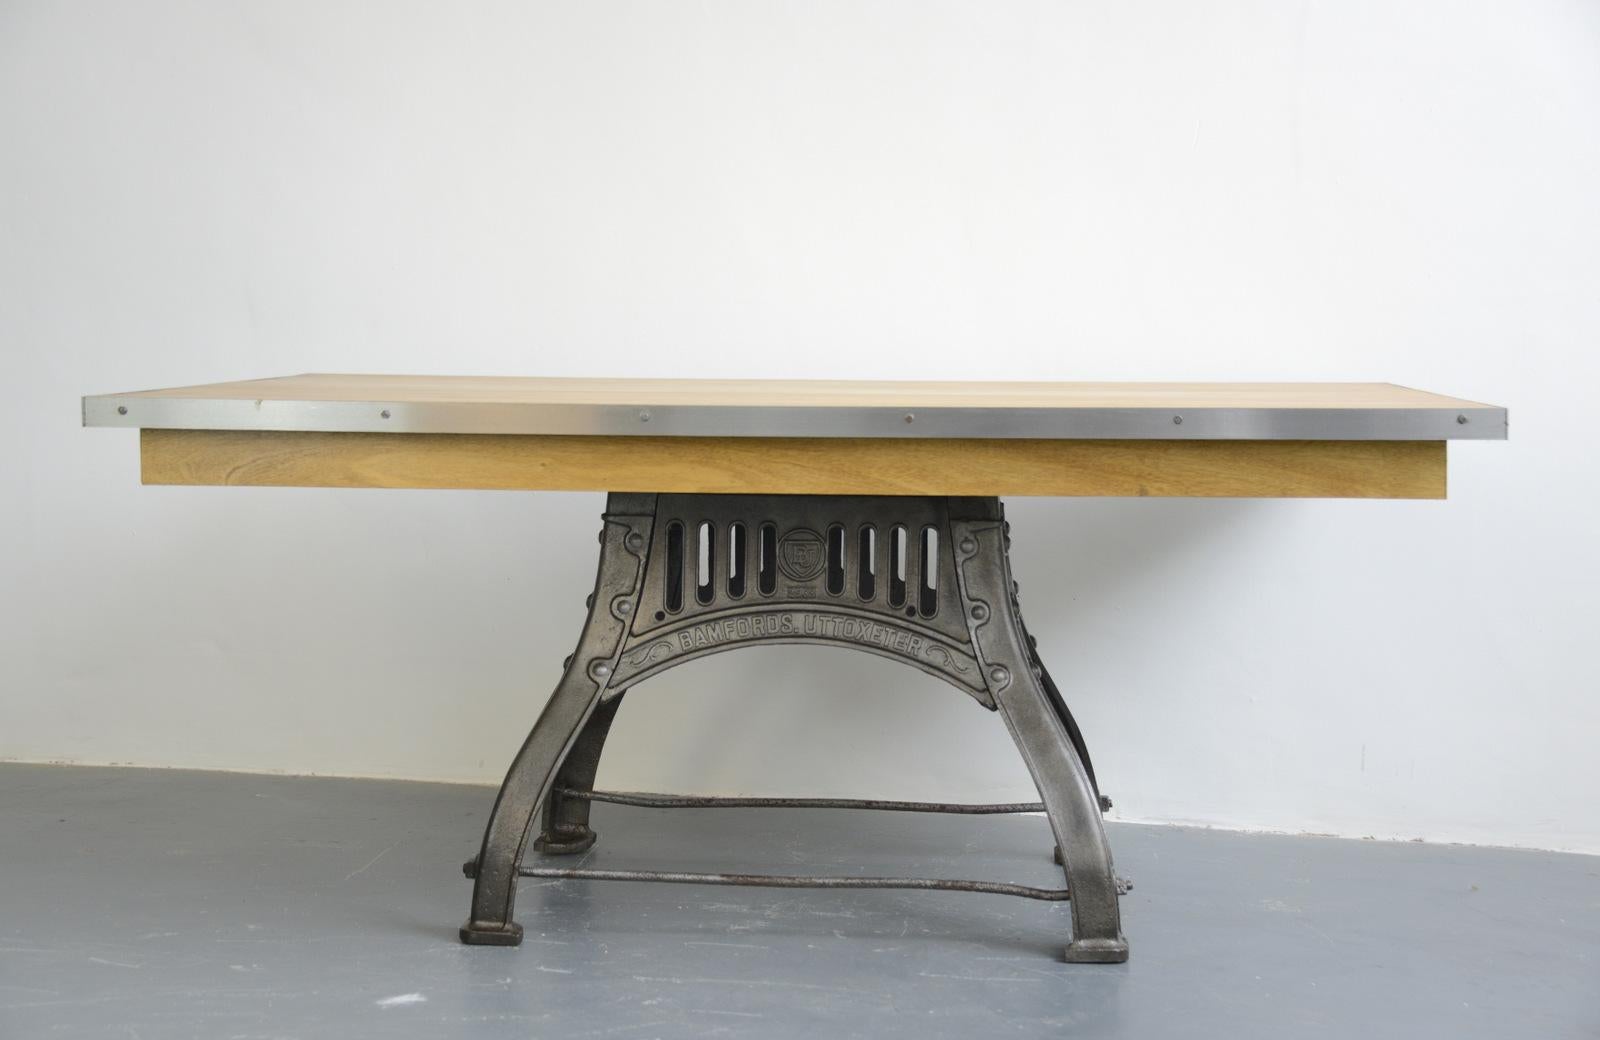 English industrial table by Bamfords, circa 1910

- Will seat 6-8
- Cast iron base
- Beautiful bradning on all 4 sides
- Steel edging 
- Solid hardwoood top
- The top is made from Idigbo 
- The top has been finished with numerous coats of